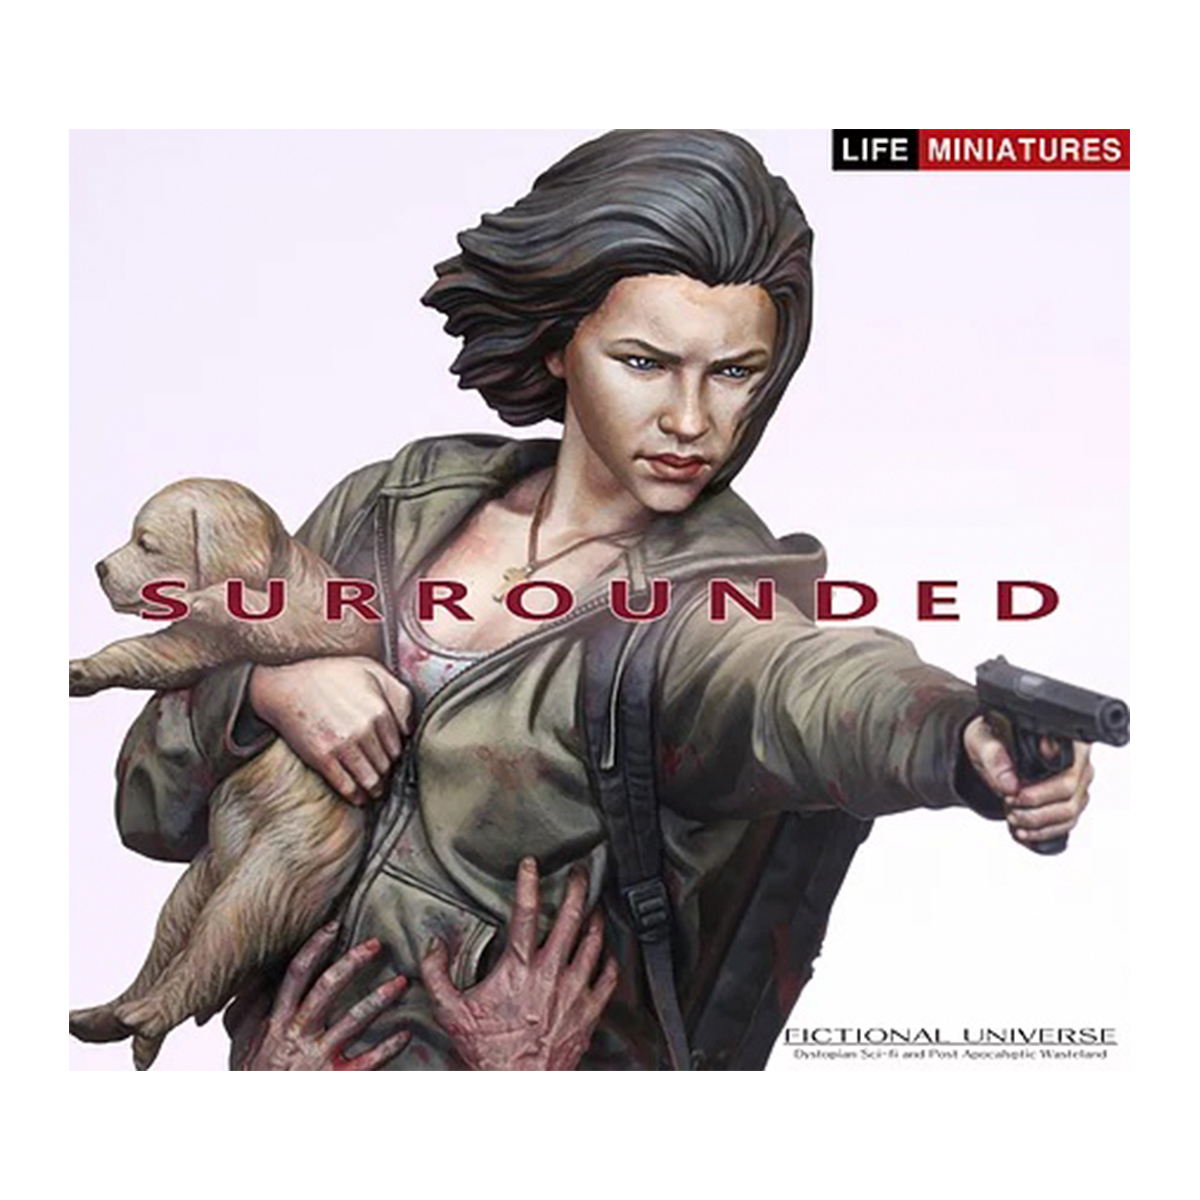 Life Miniatures – SURROUNDED – 1/10 bust